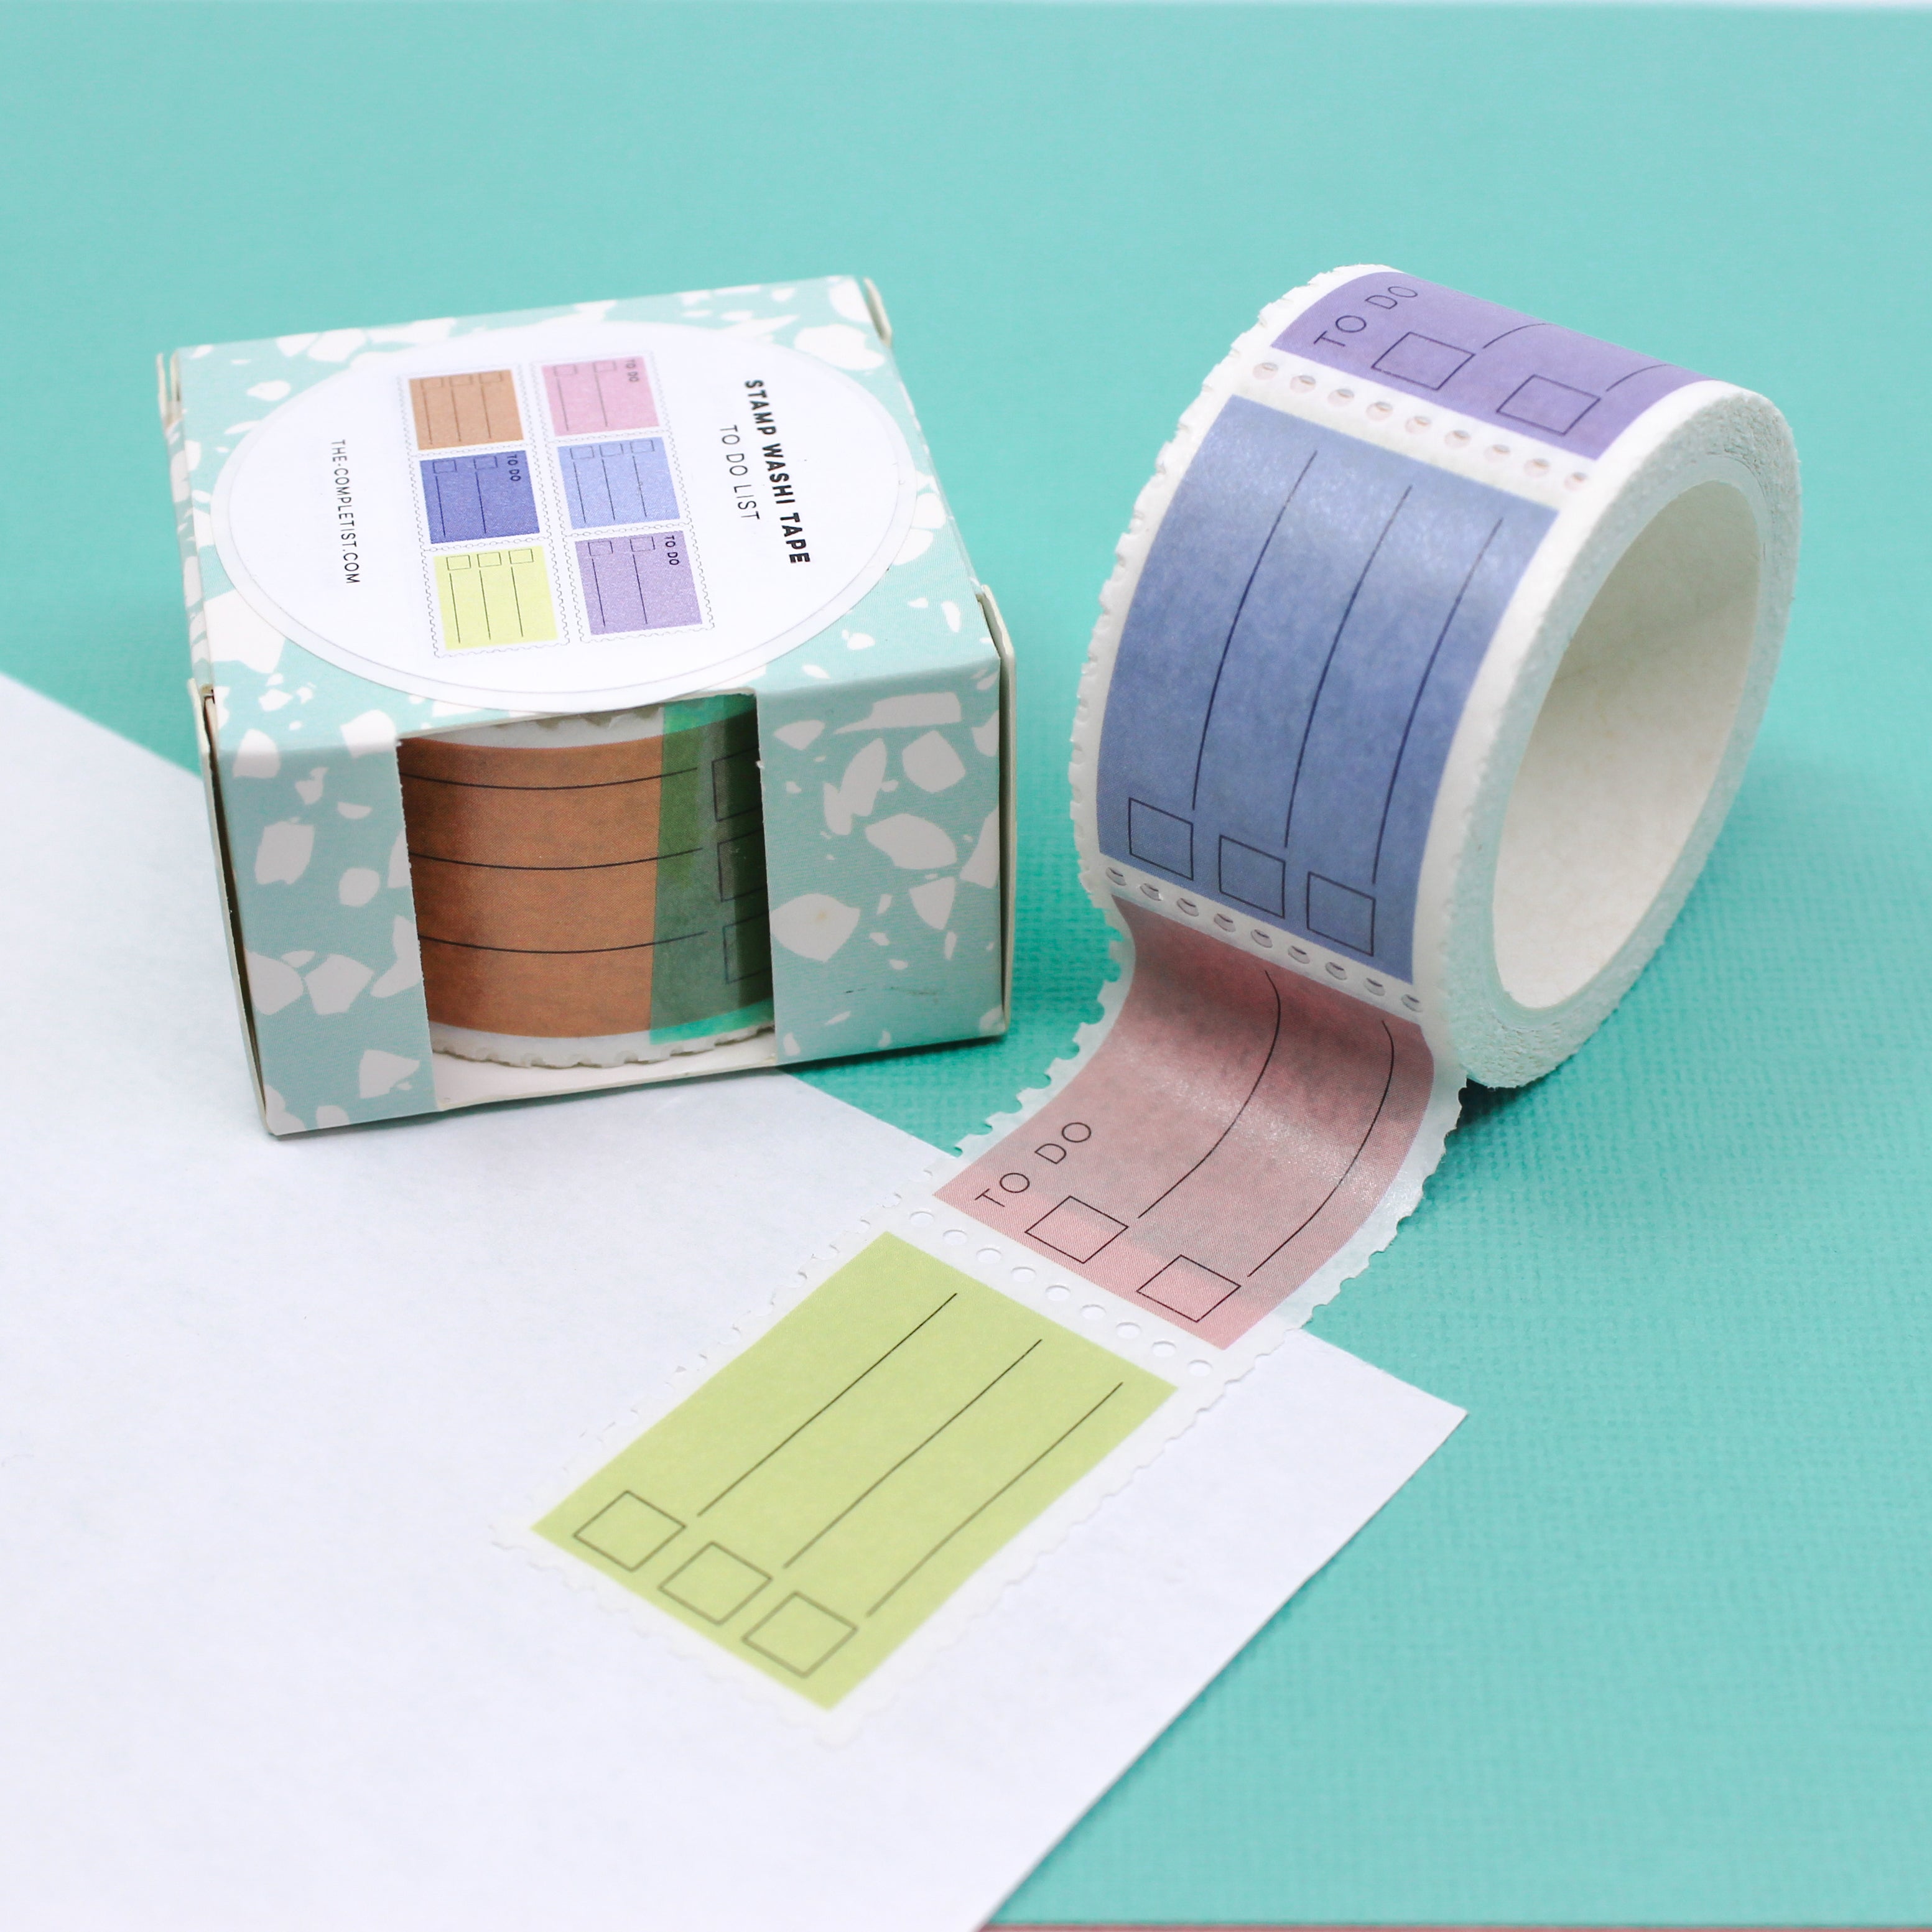 This is a multi color to do list days of the week stamps pattern washi tape from BBB Supplies Craft Shop